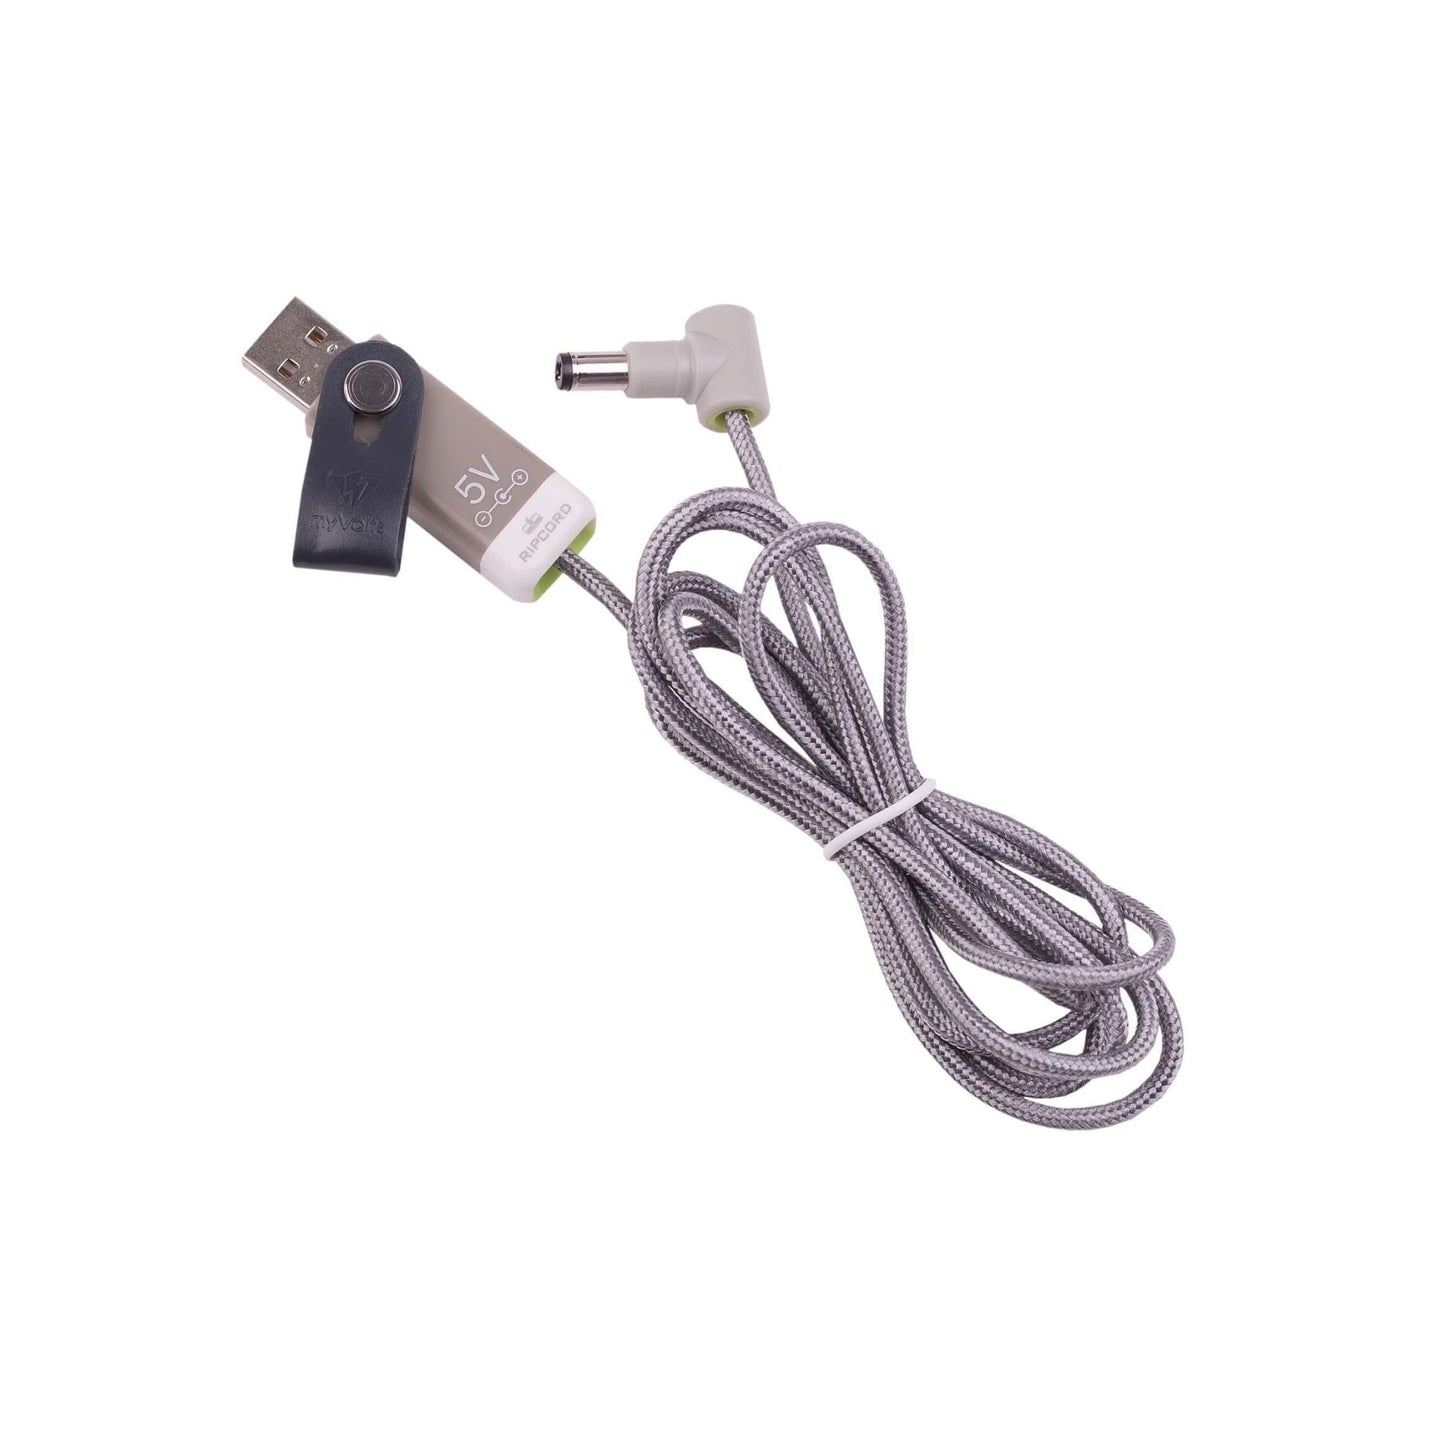 Ripcord USB to 5V DC power cable